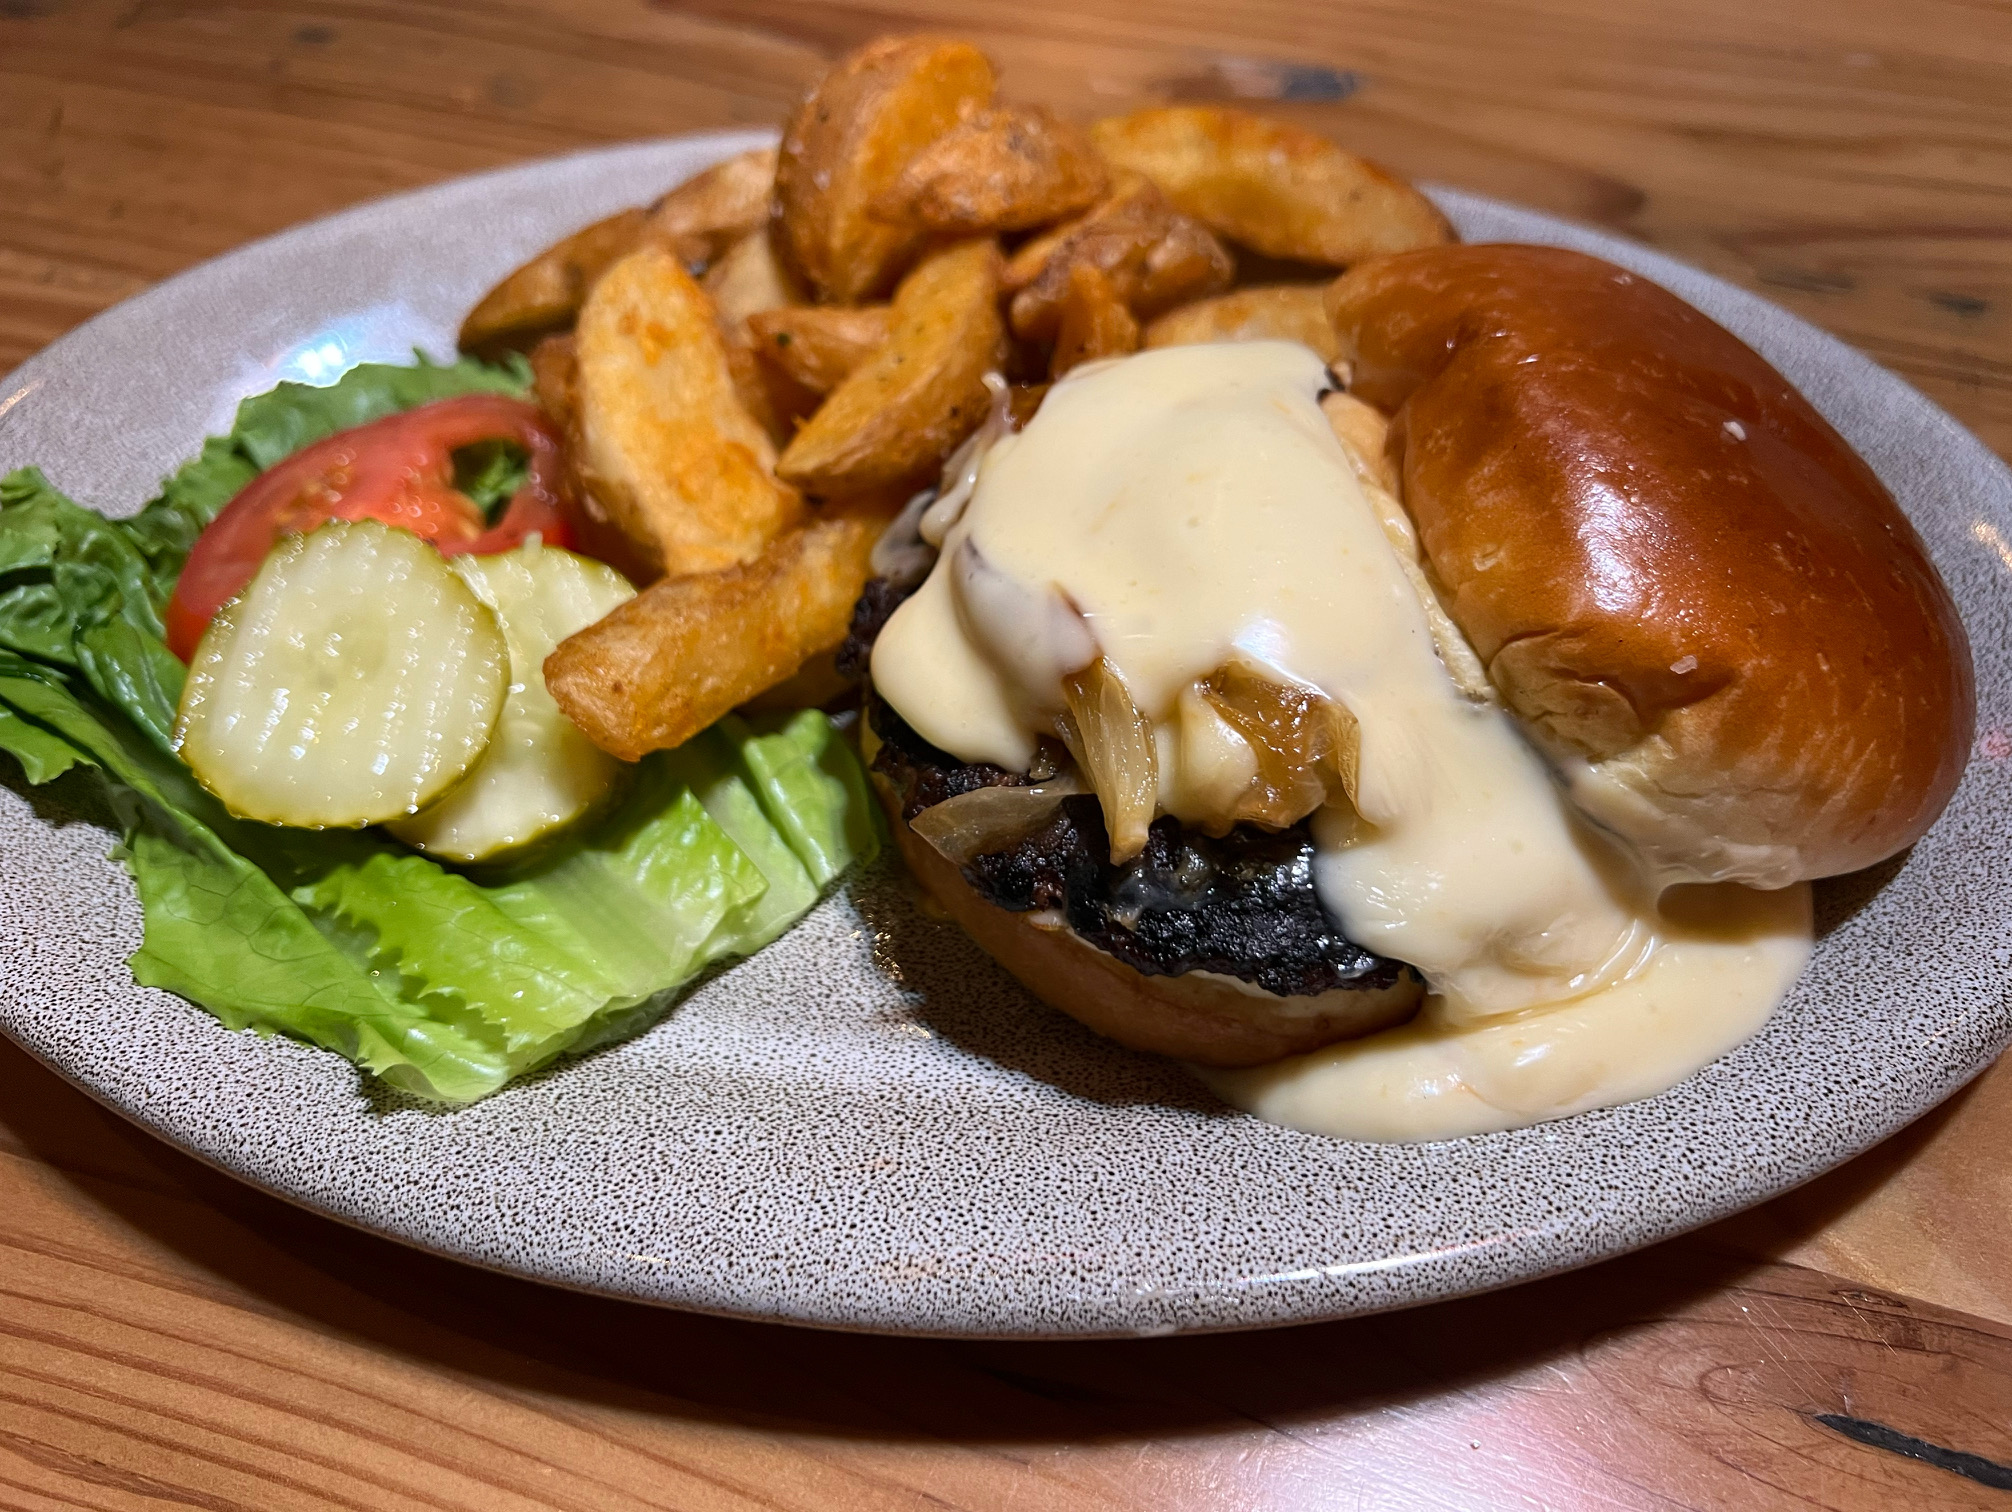 On a gray speckled plate, there is a burger drowning in housemade cheese sauce with a side of fries. Photo by Alyssa Buckley.